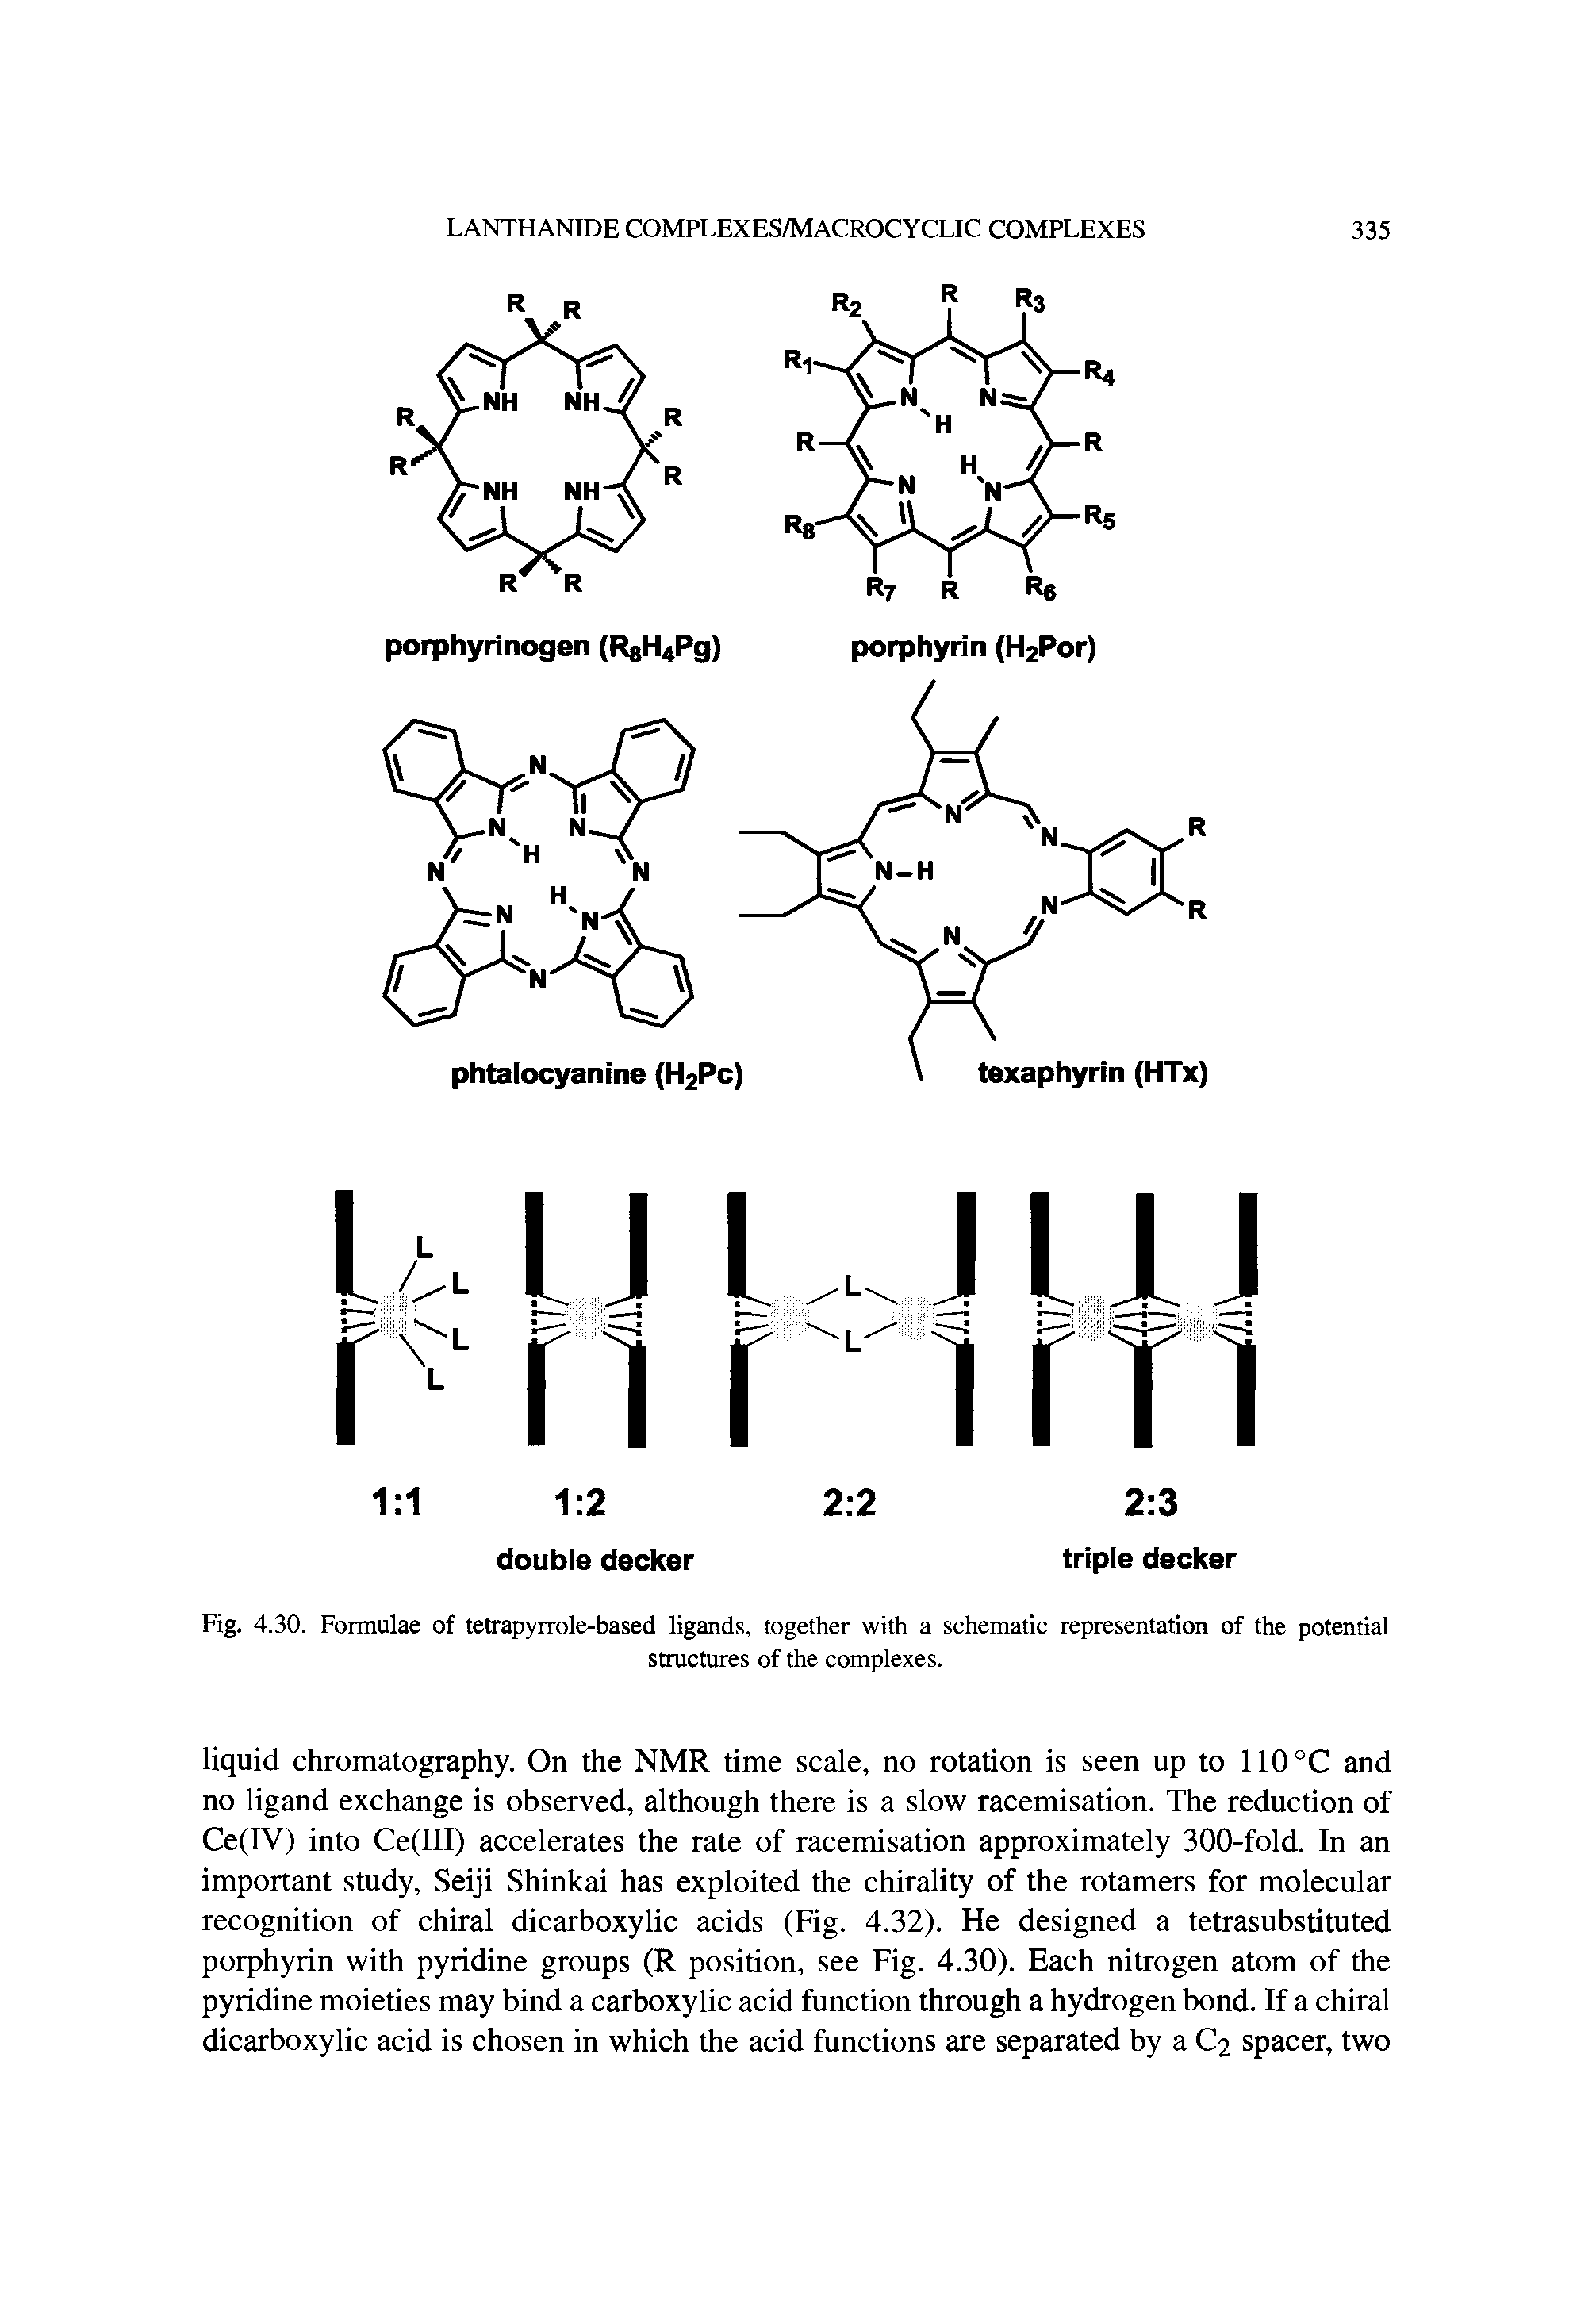 Fig. 4.30. Formulae of tetrapyrrole-based ligands, together with a schematic representation of the potential...